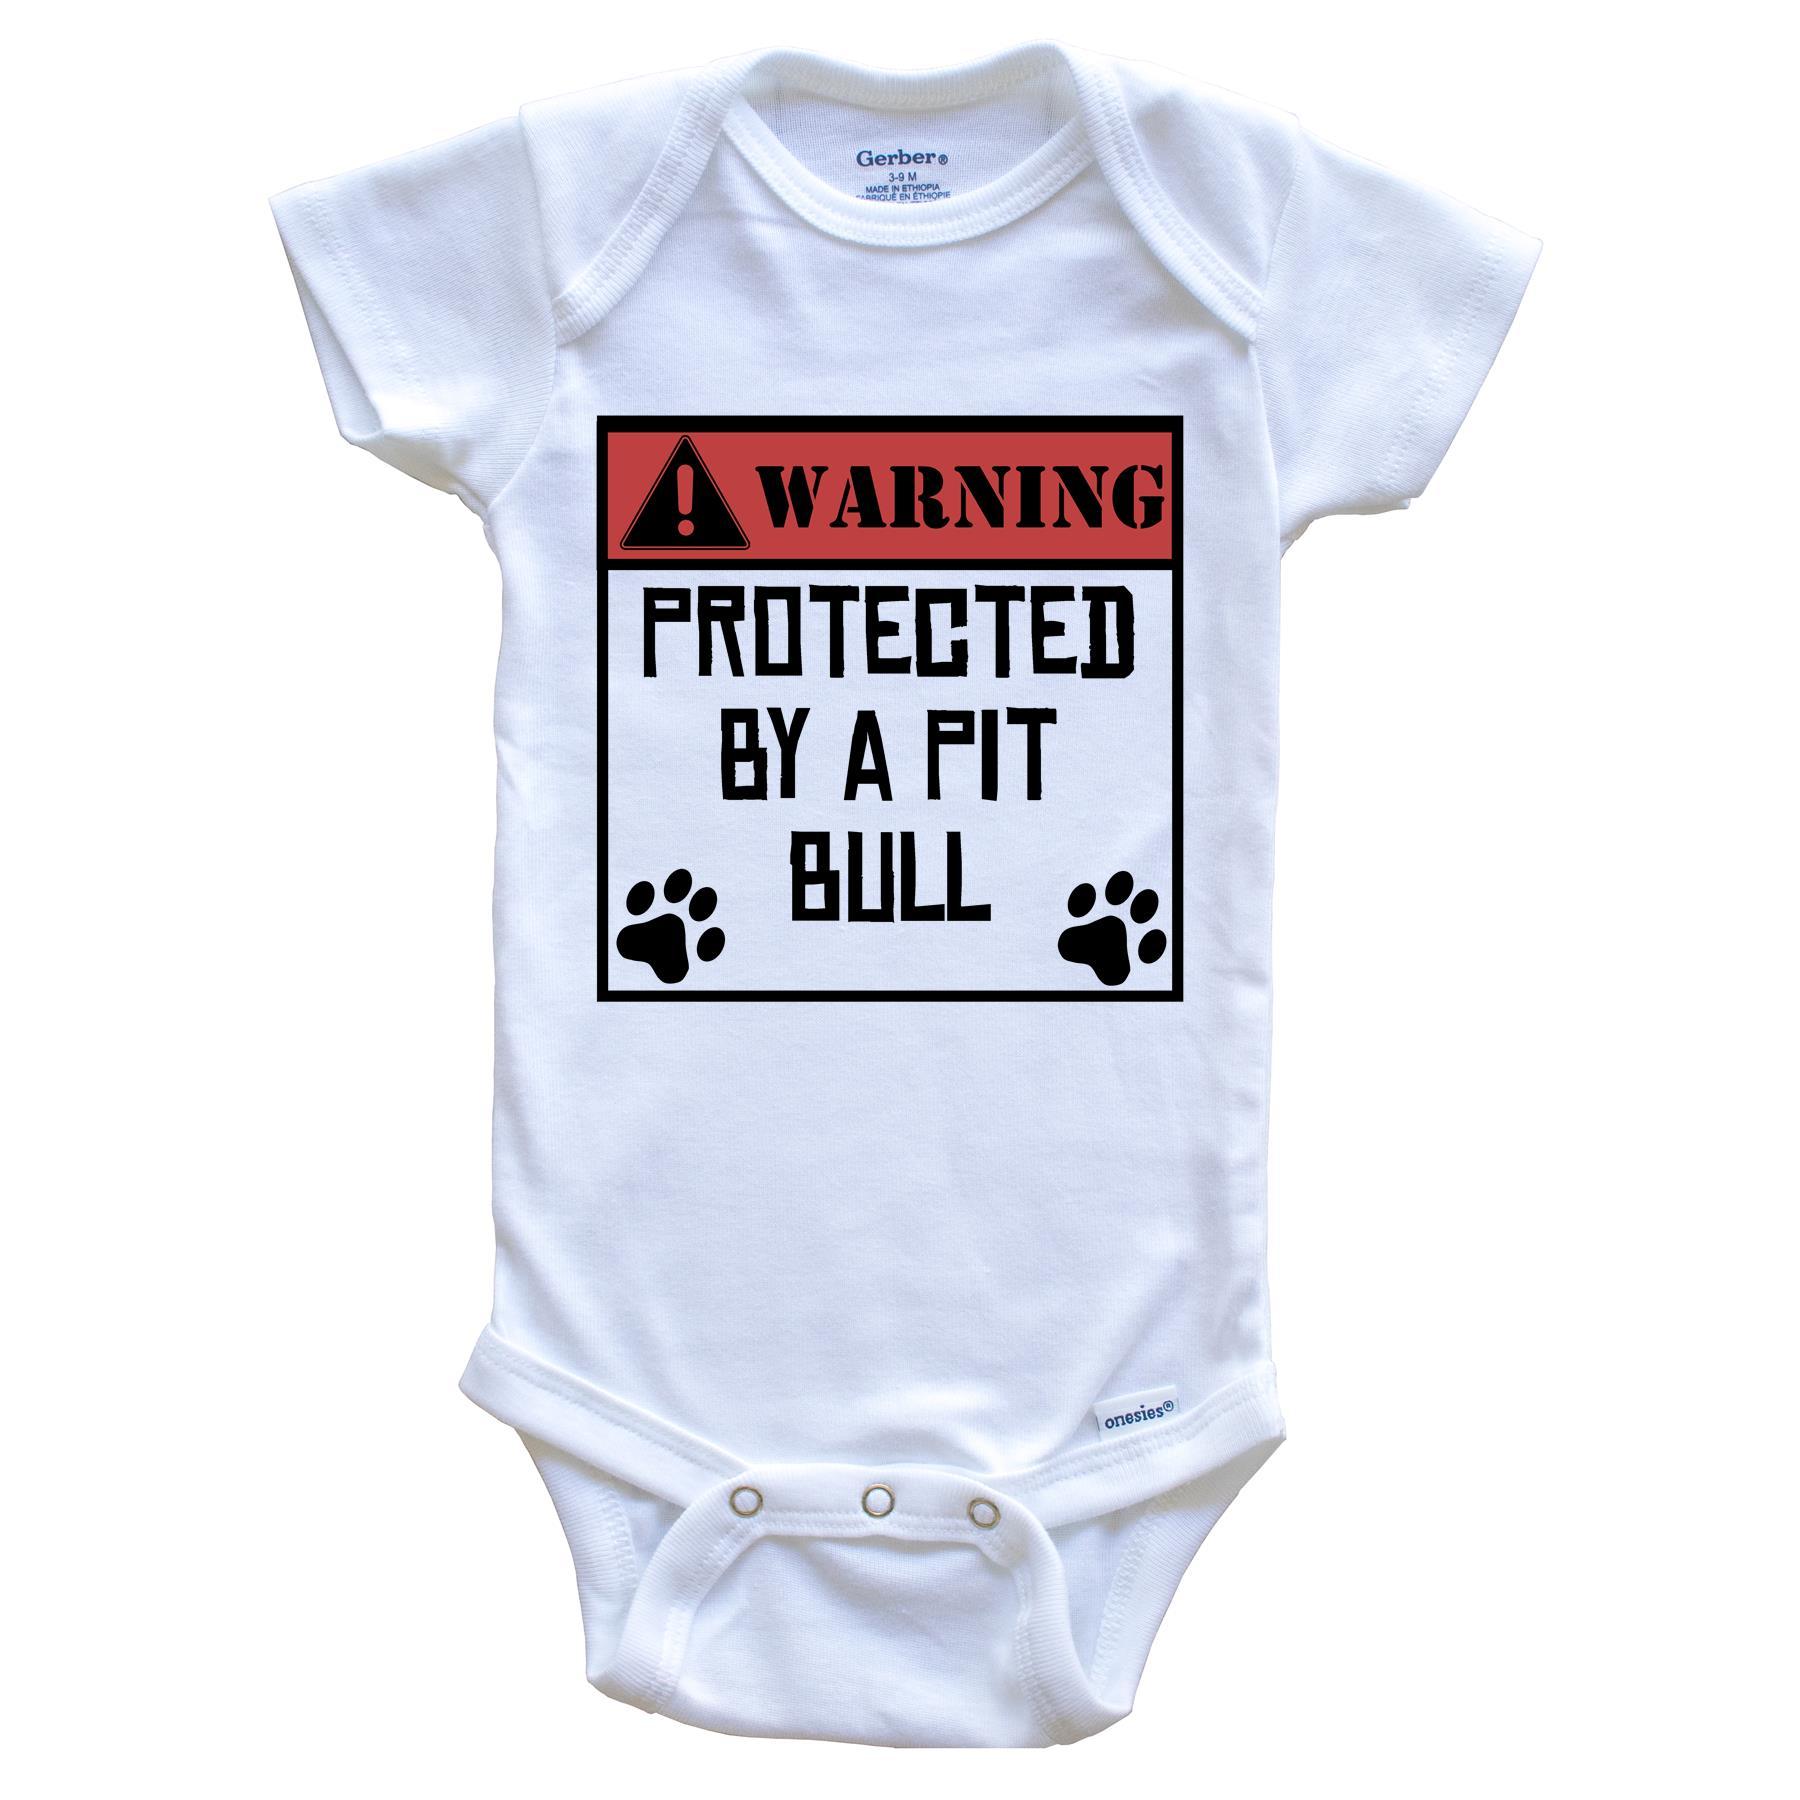 Warning Protected By A Pit Bull Funny Baby Onesie